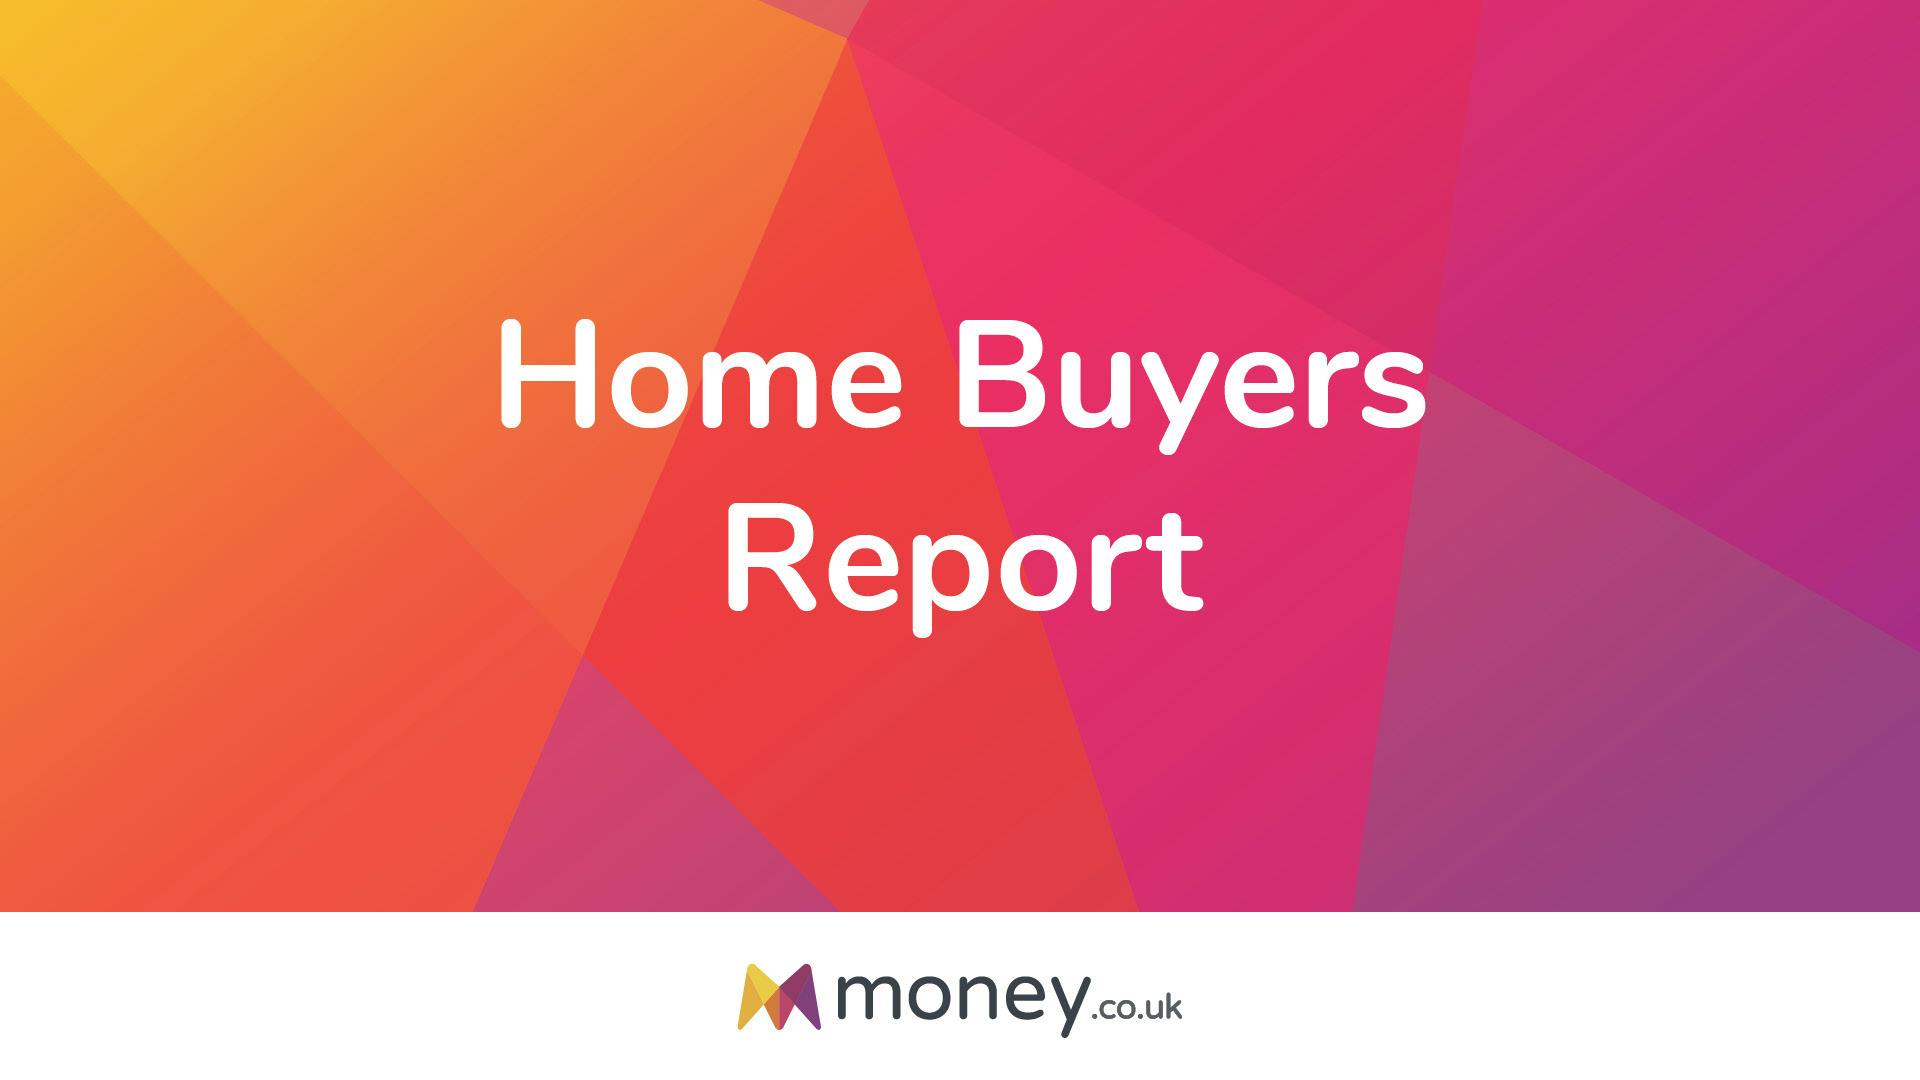 Home Buyers Report graphic